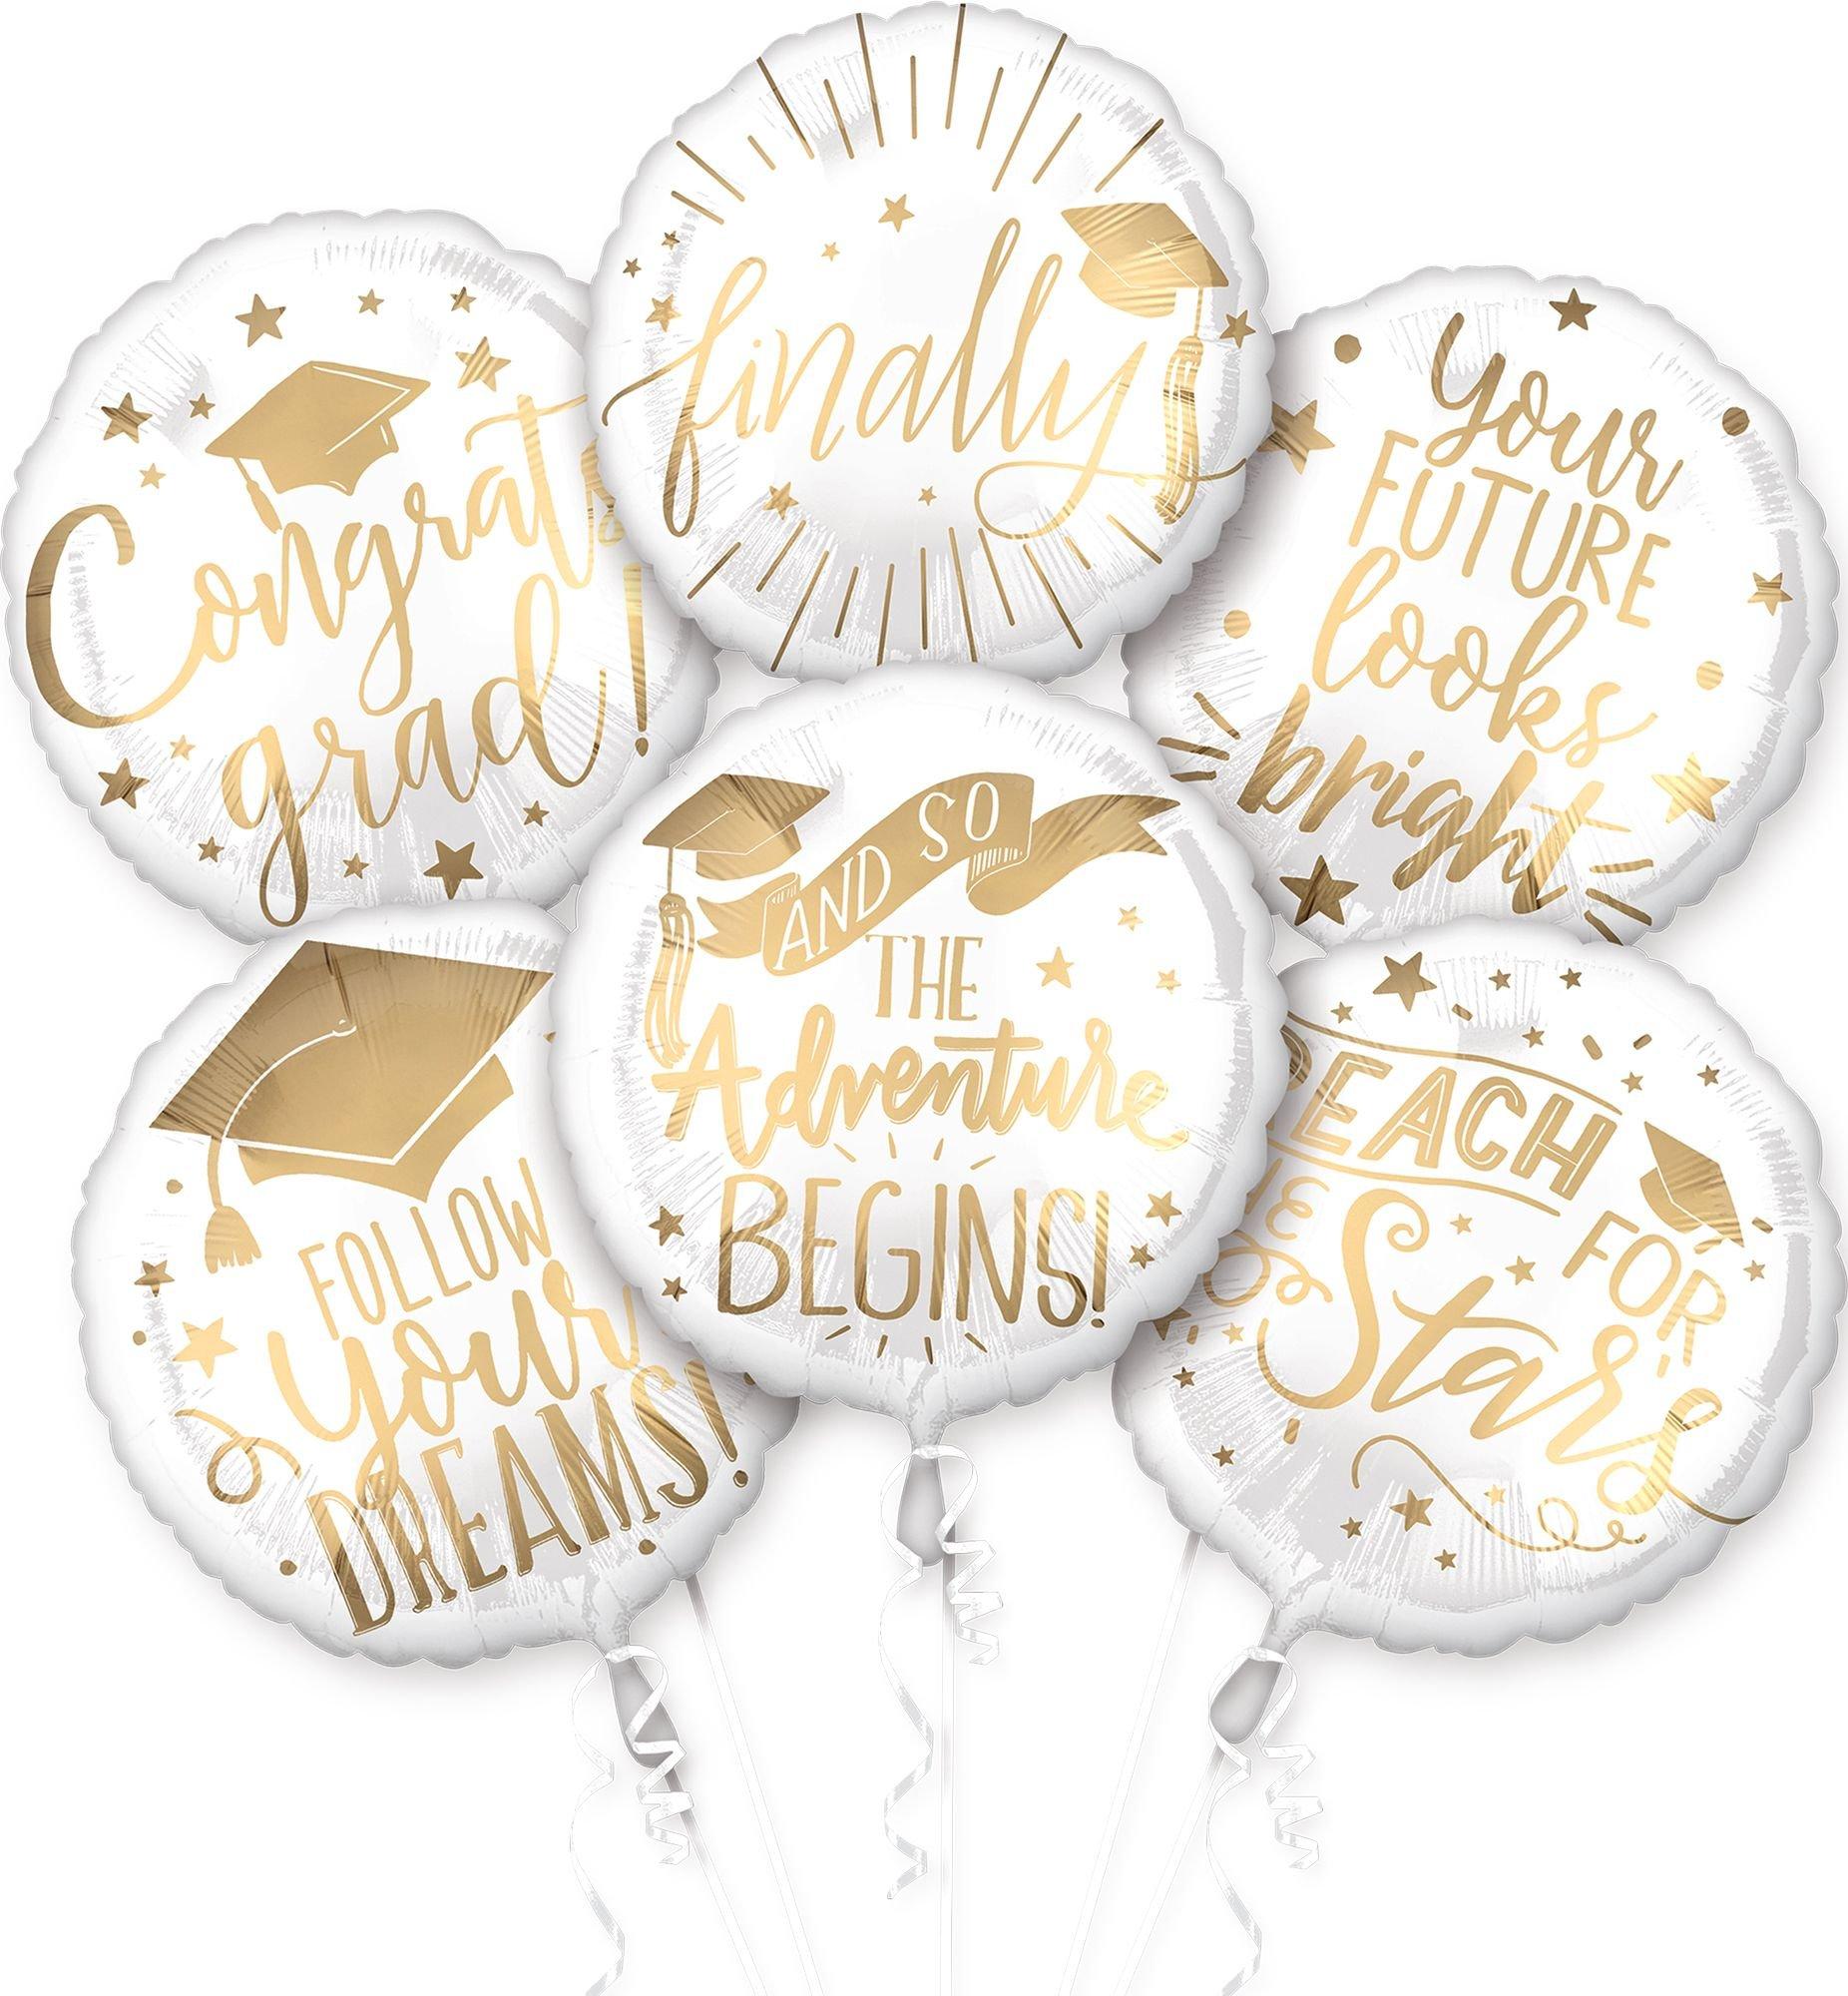 White & Gold The Adventure Begins Balloons 6ct